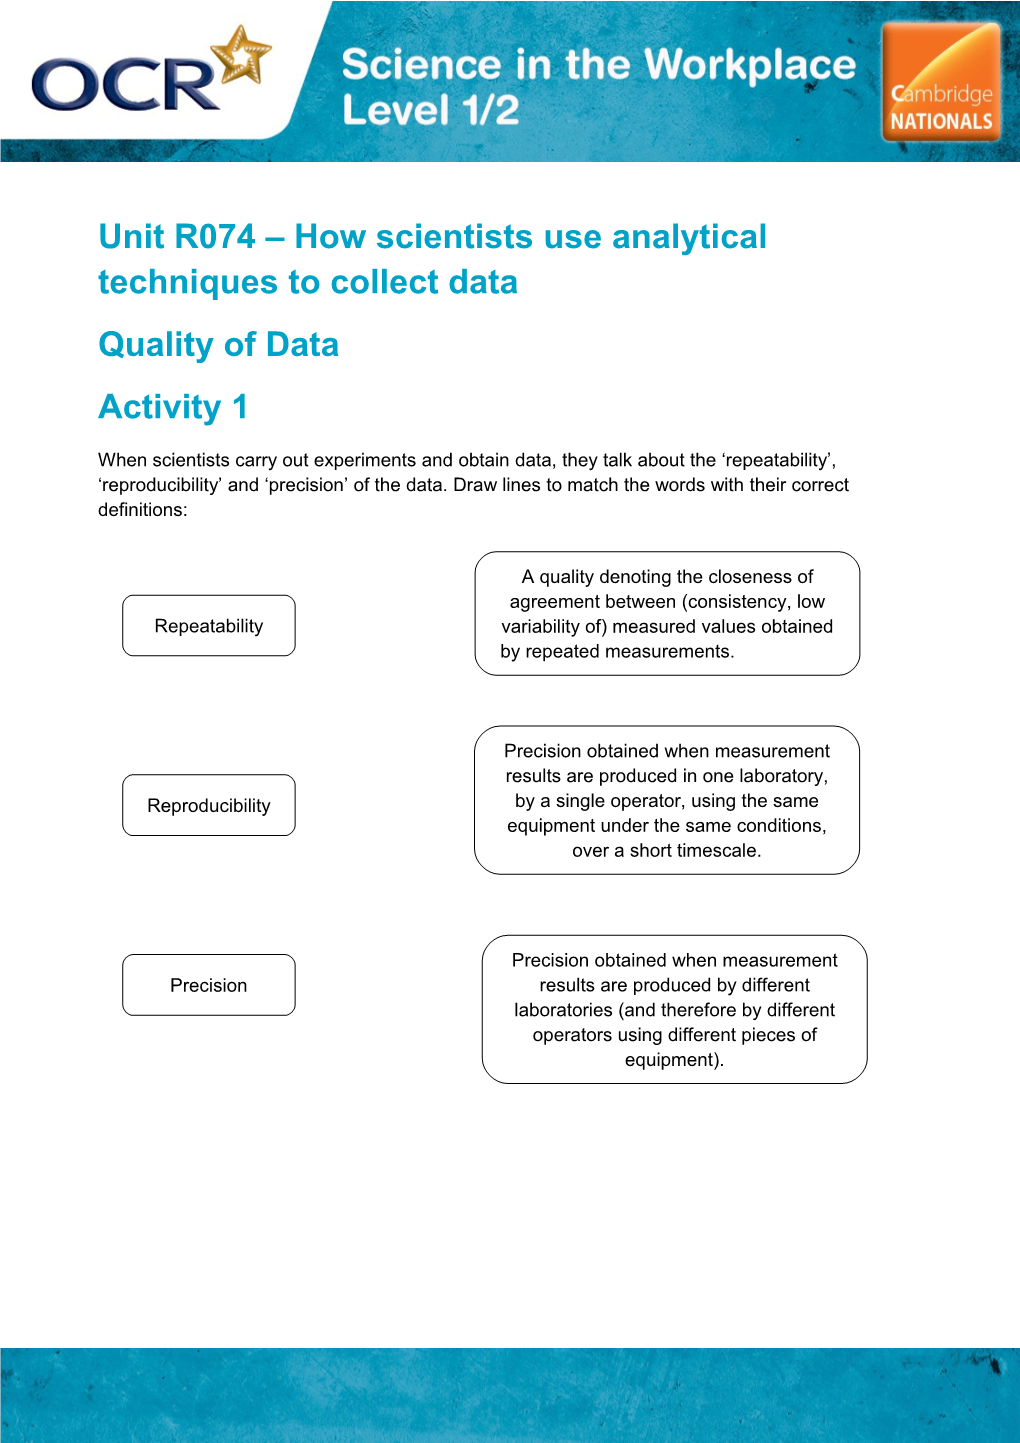 Unit R074 How Scientists Use Analytical Techniques to Collect Data